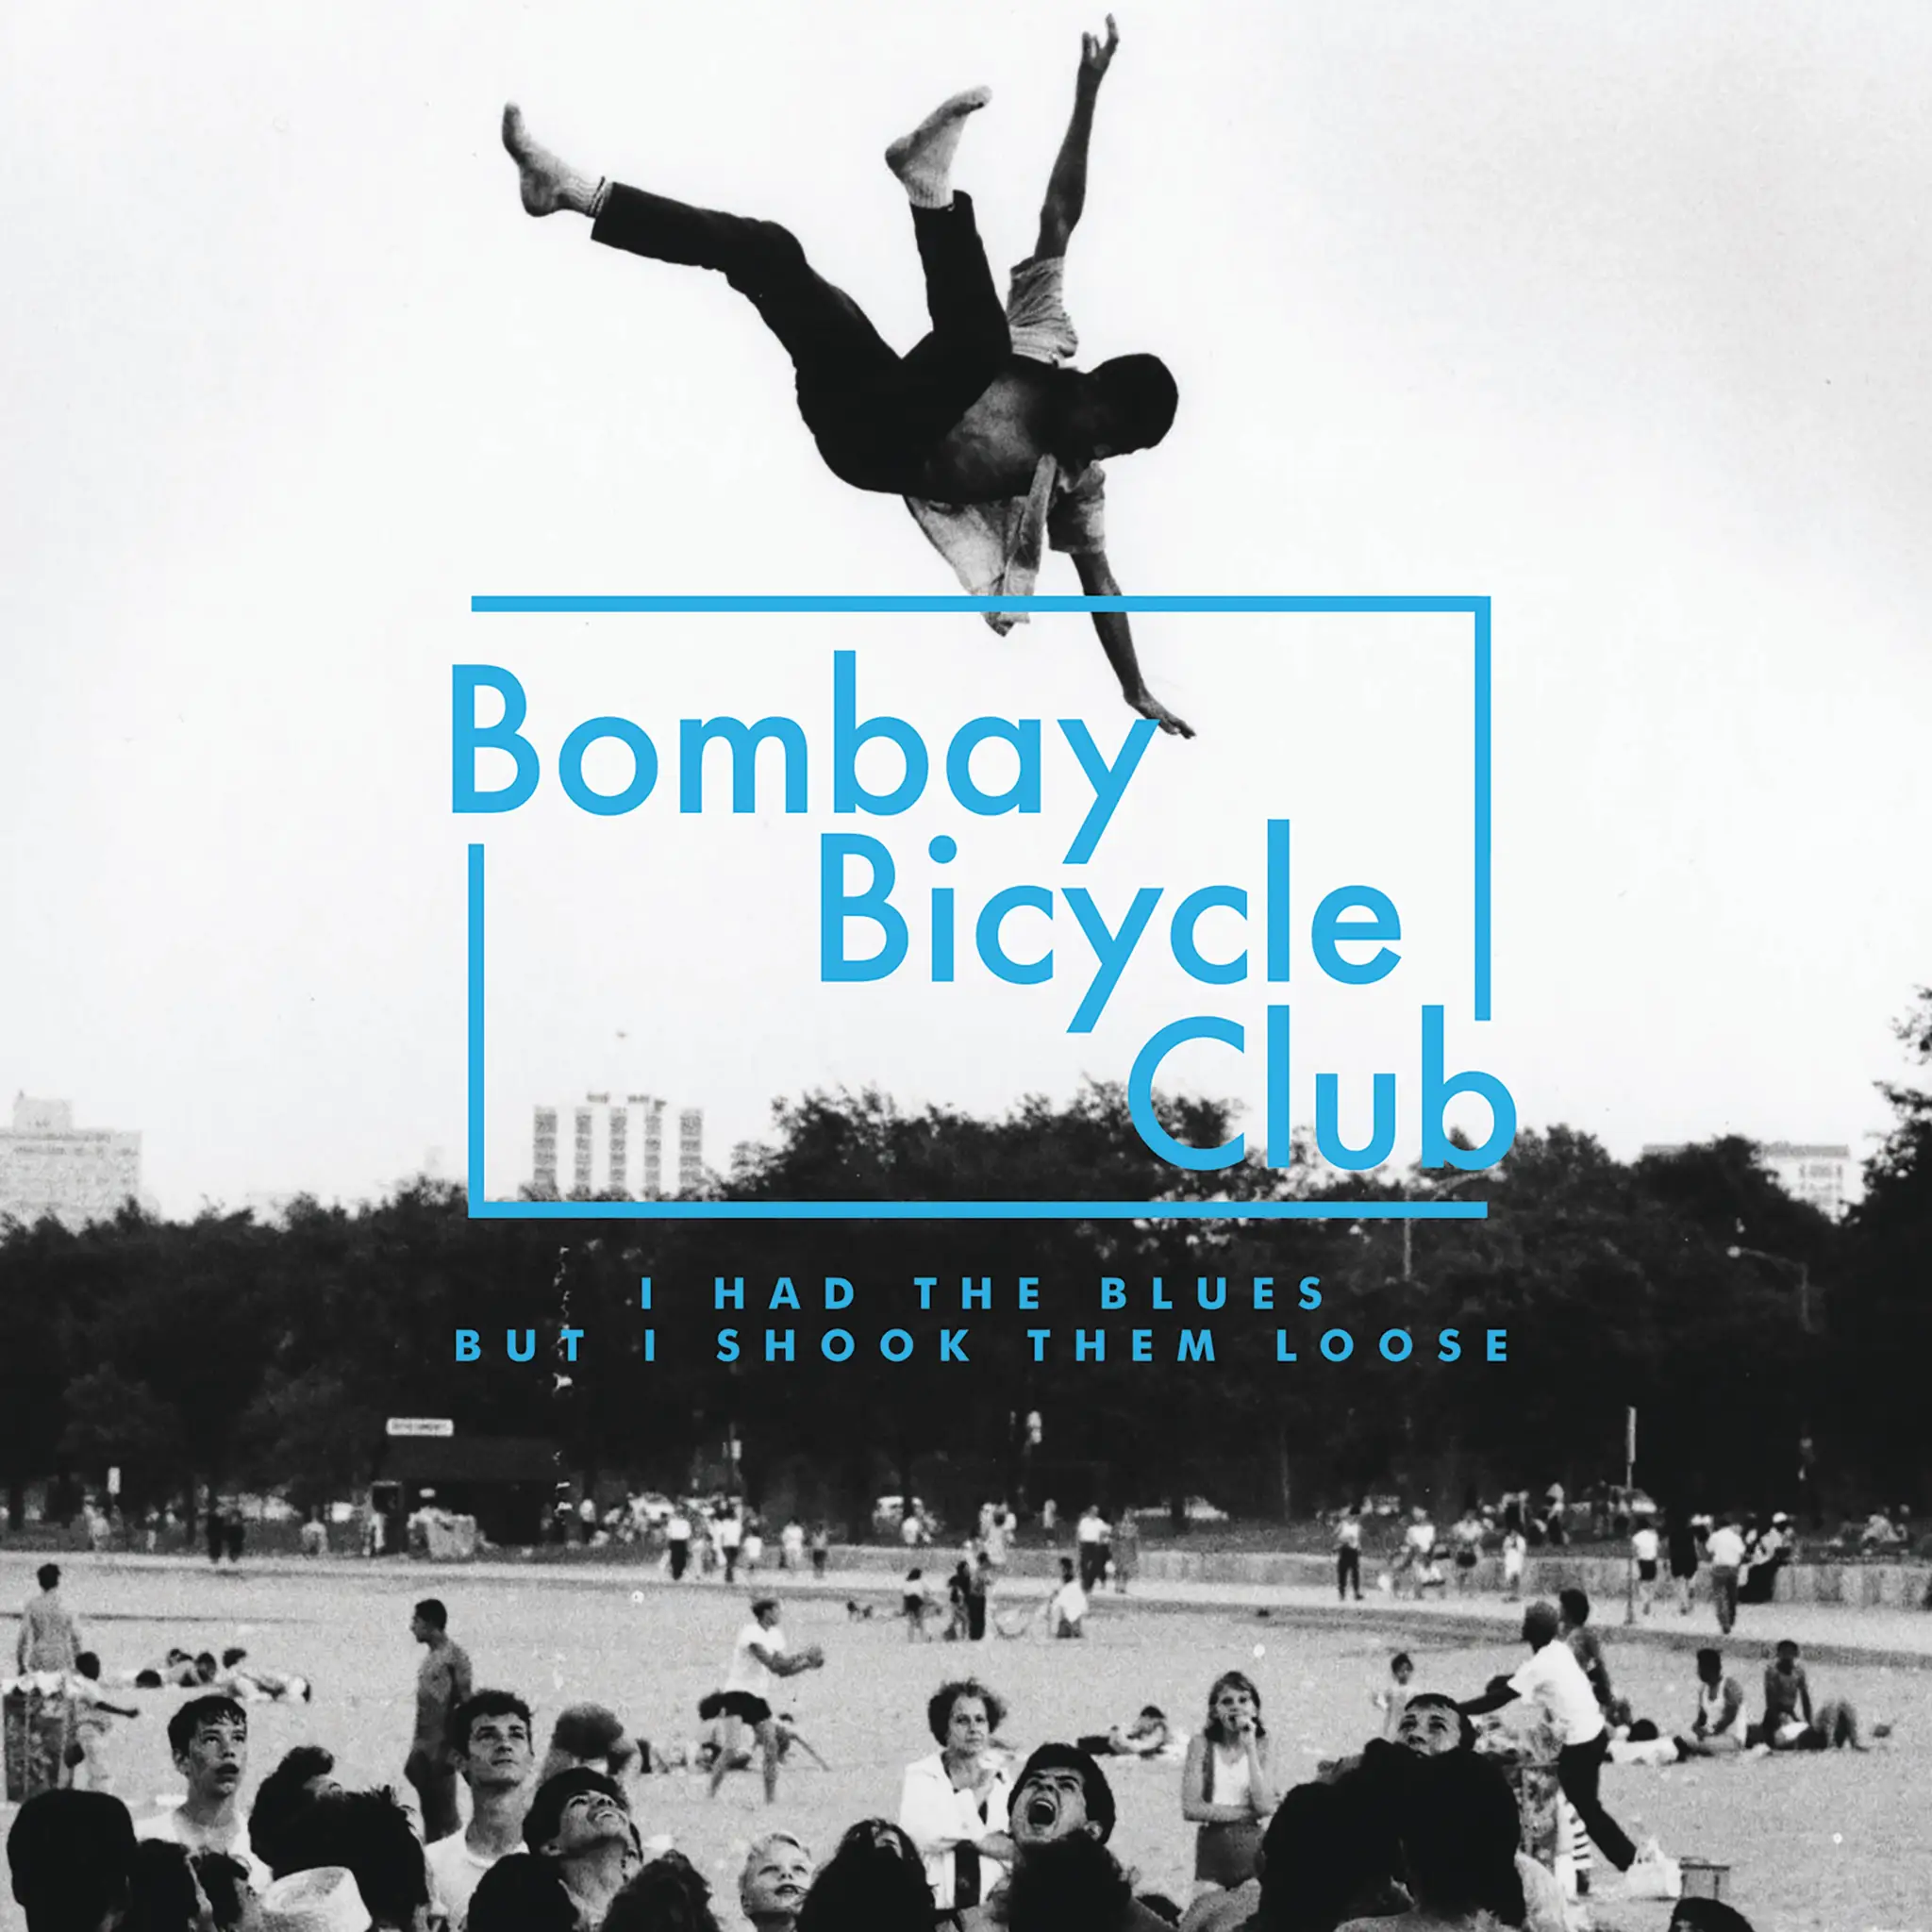 Bombay Bicycle Club - I Had The Blues But I Shook Them Loose artwork